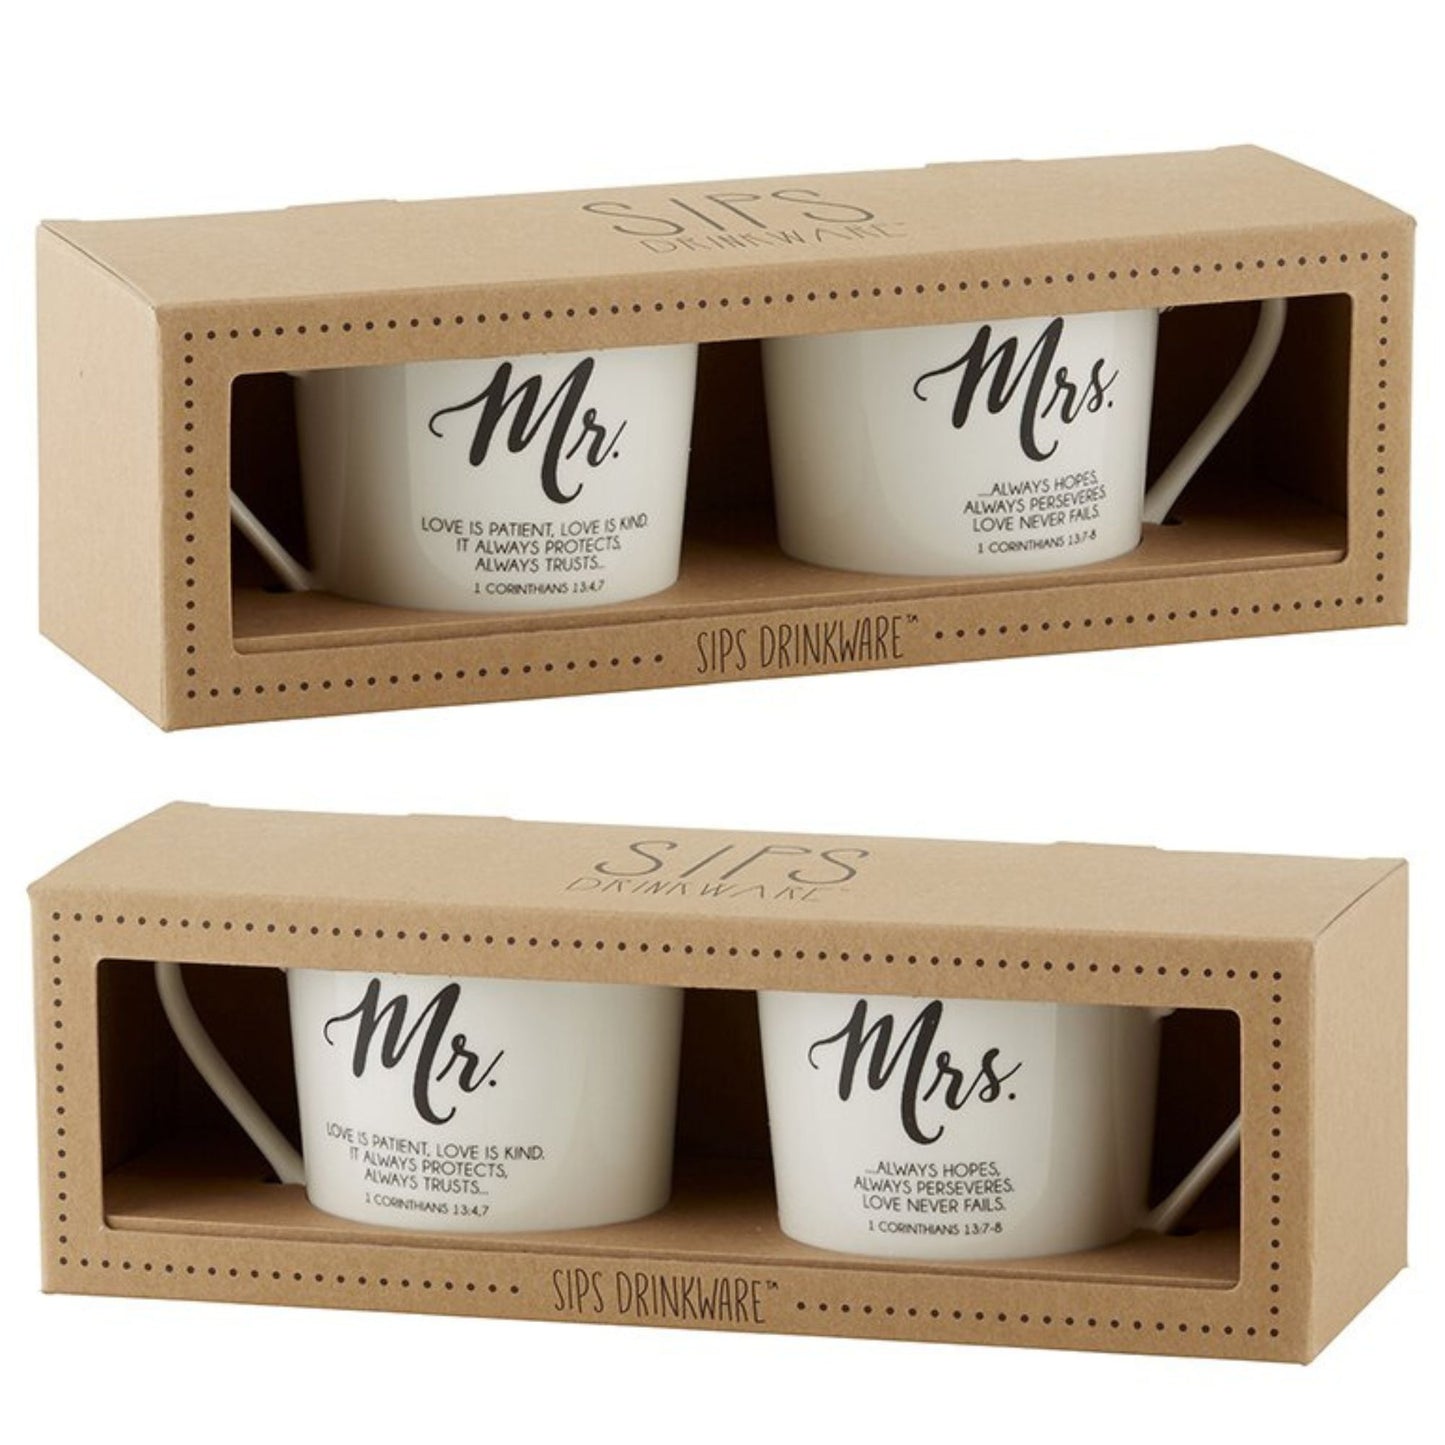 Mr & Mrs Cafe Coffee Mug Set - Love is Patient... Love Never Fails - 1 Corinthians - Inspirational Mugs | Wedding gift, Anniversary gift, Couples gift | shown in gift box | oak7west.com